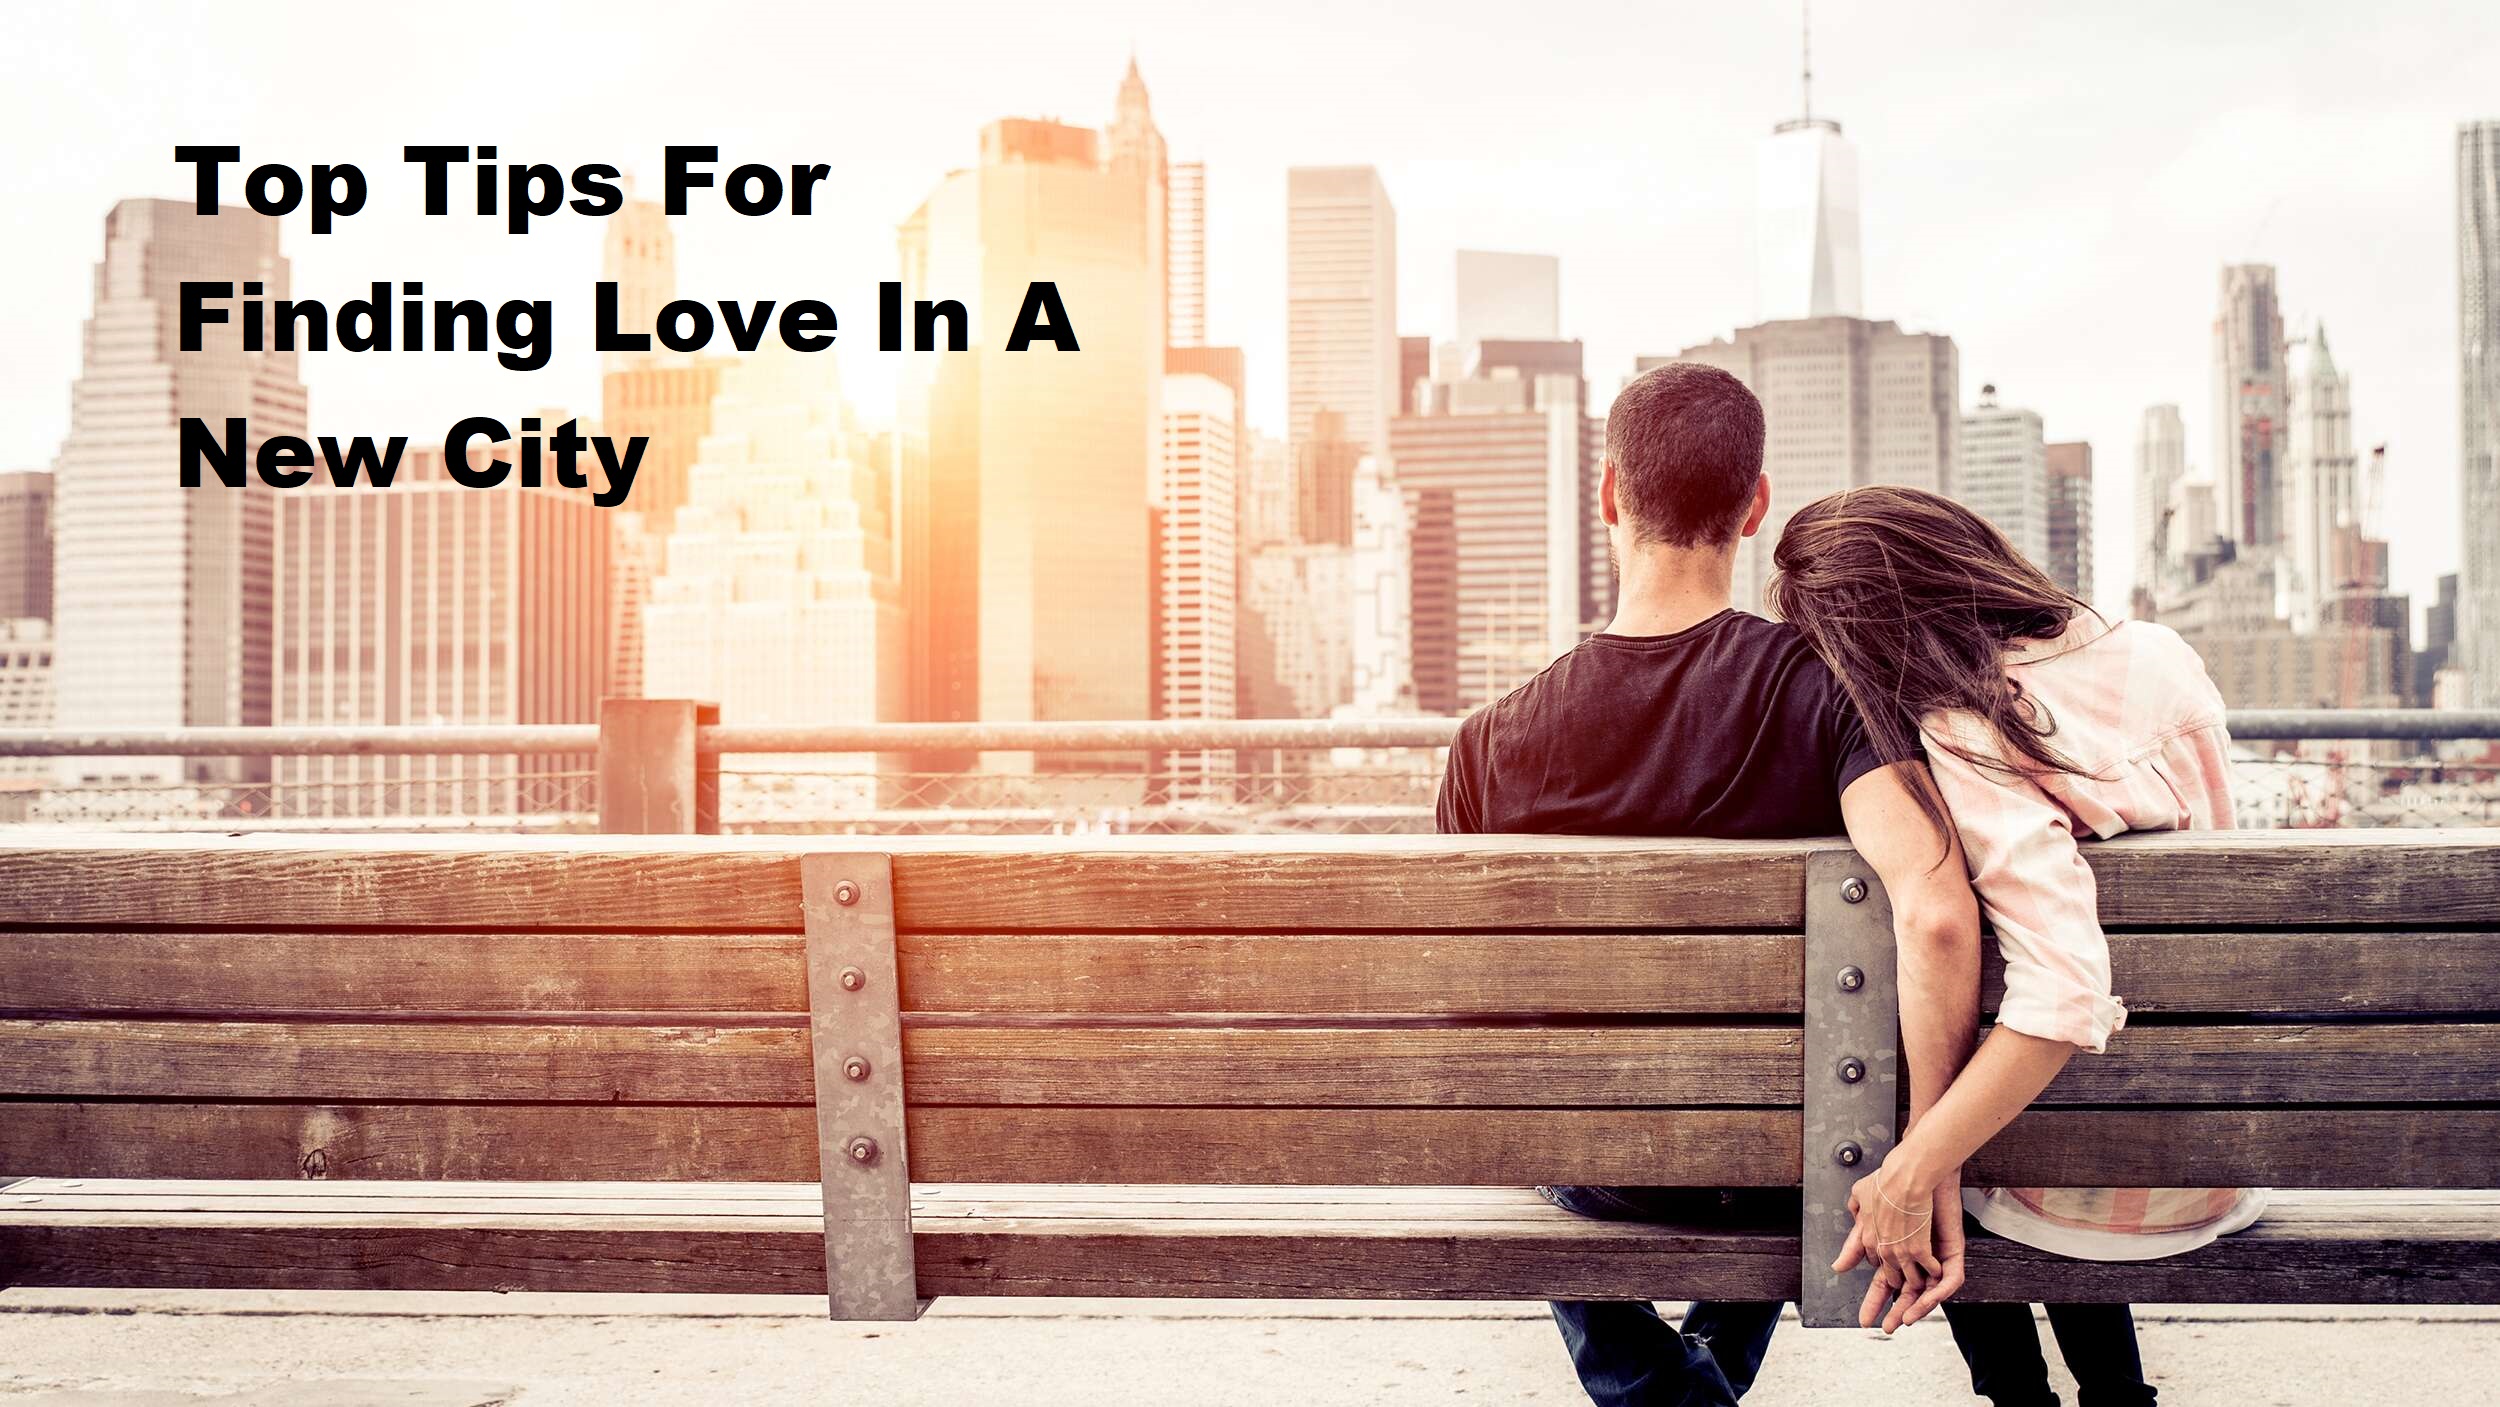 Top Tips For Finding Love In A New City